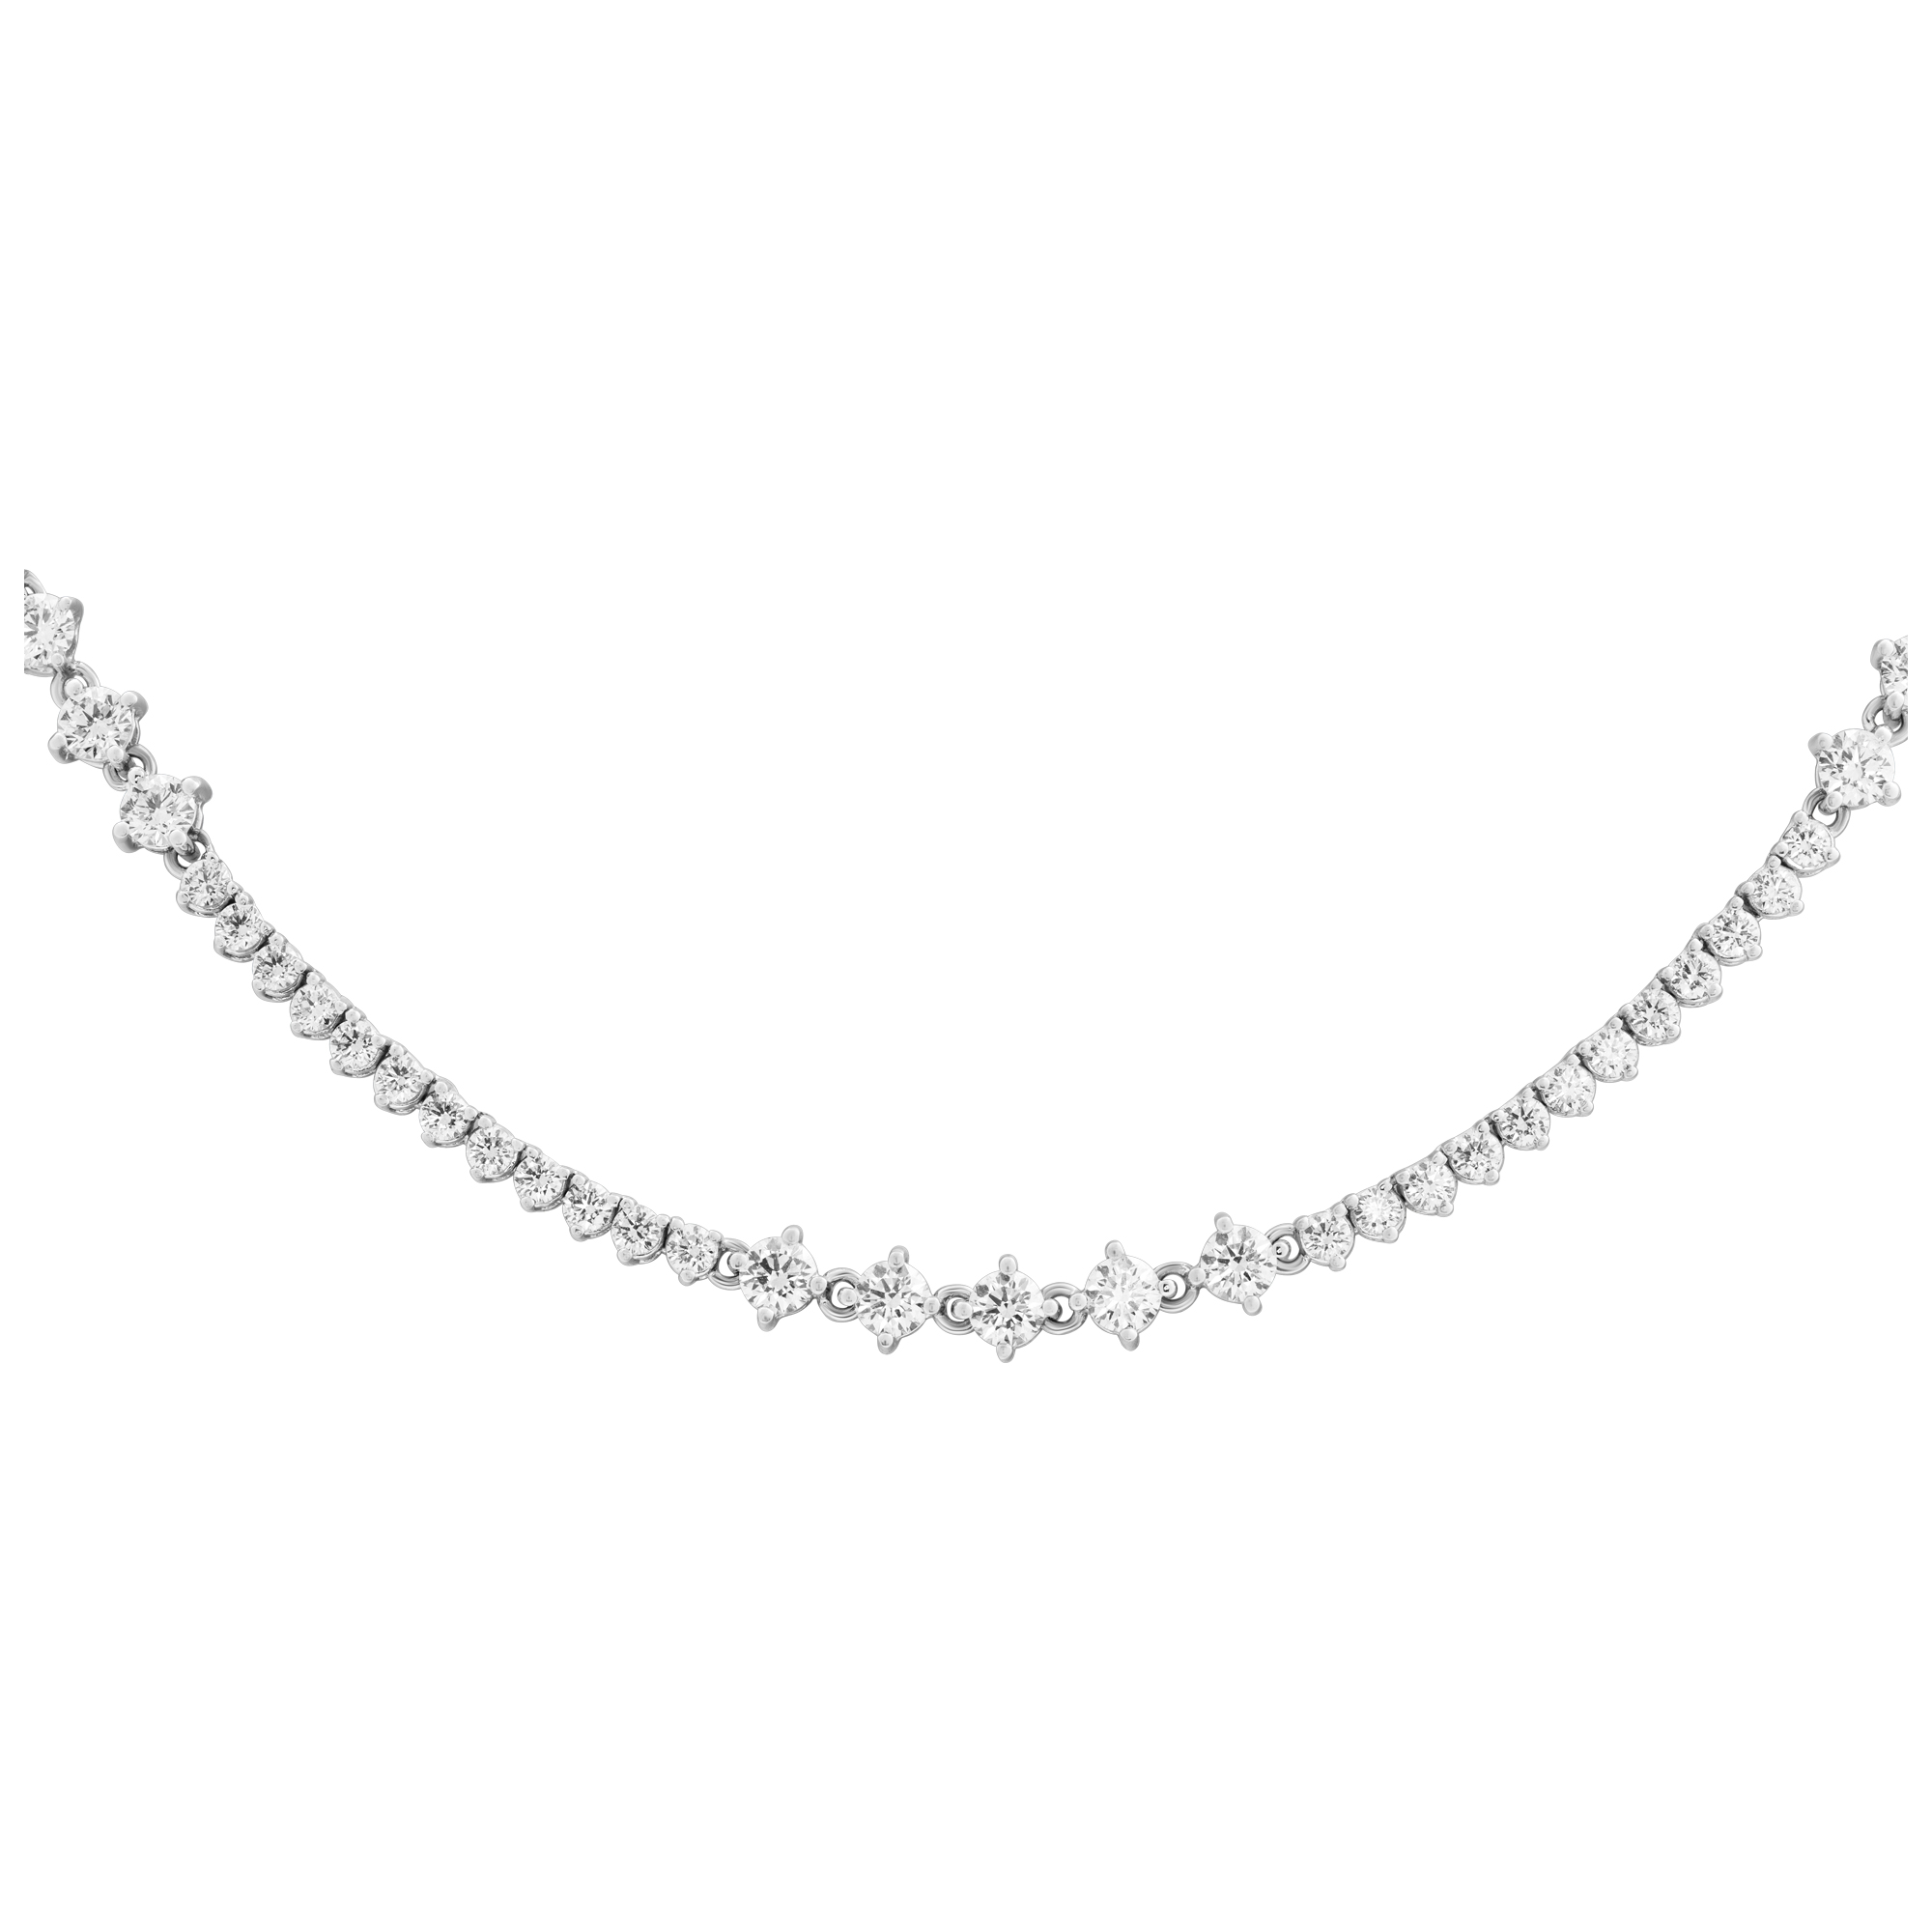 Diamond line necklace in 18k white gold with 7.6 carats in G-H Color VS Clarity diamonds image 1